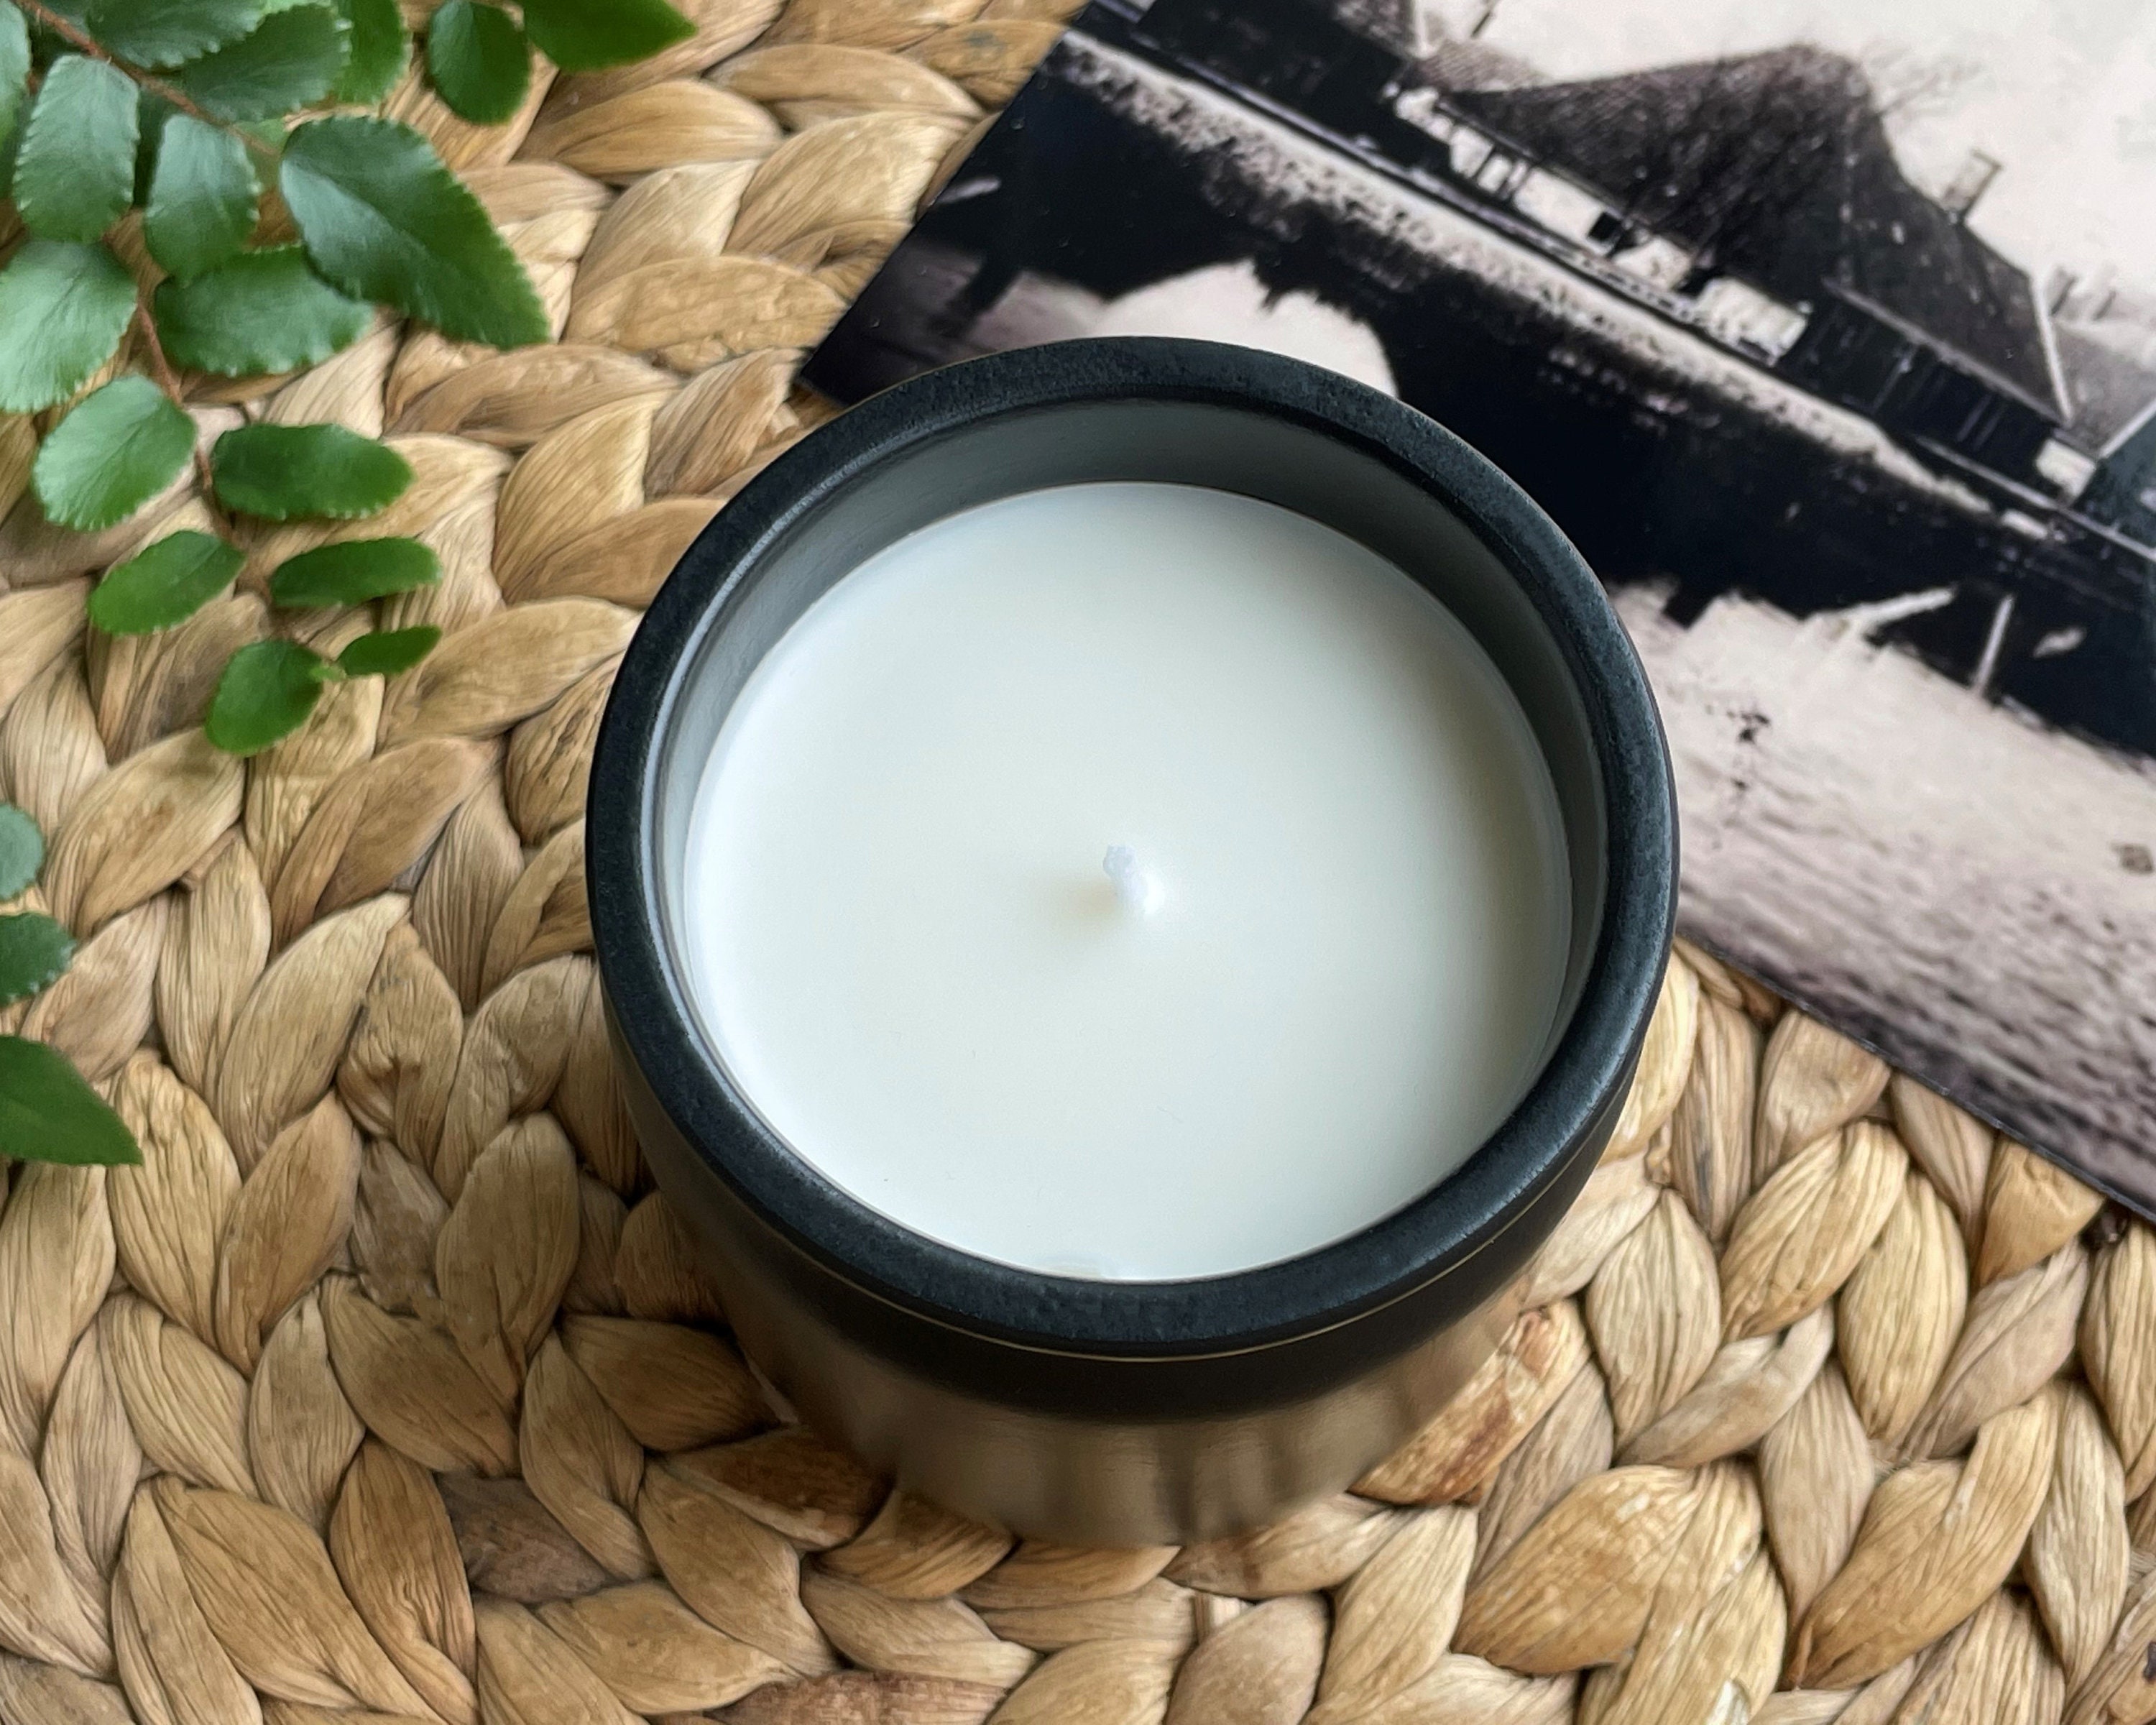 Rapeseed Wax For Candles 500g – Areretta's Limited